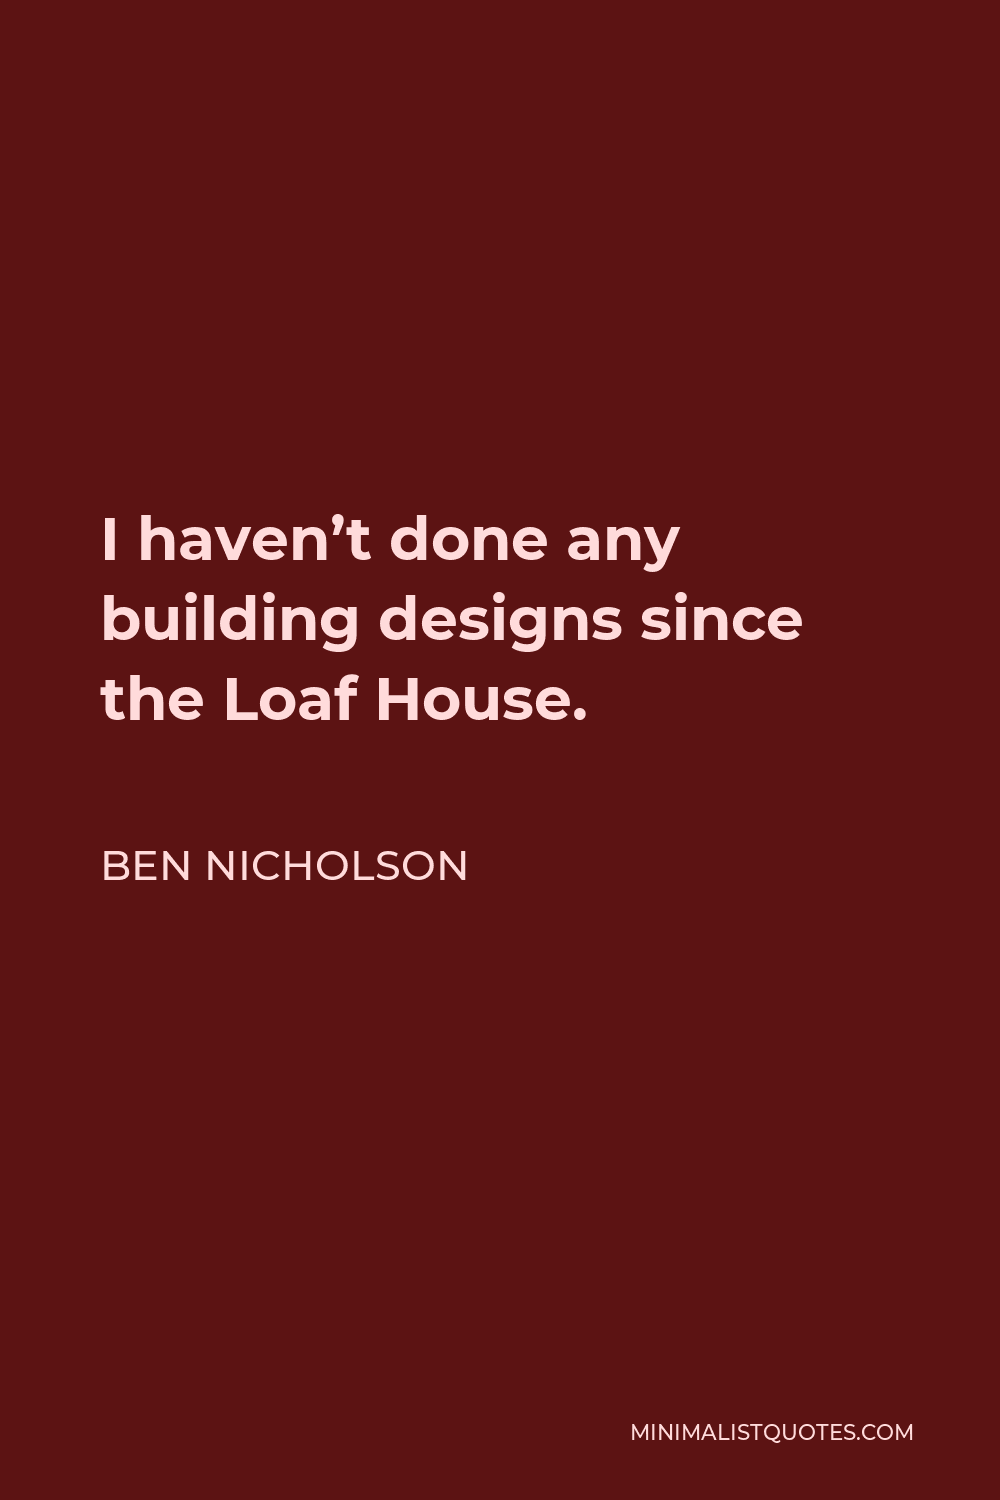 Ben Nicholson Quote - I haven’t done any building designs since the Loaf House.